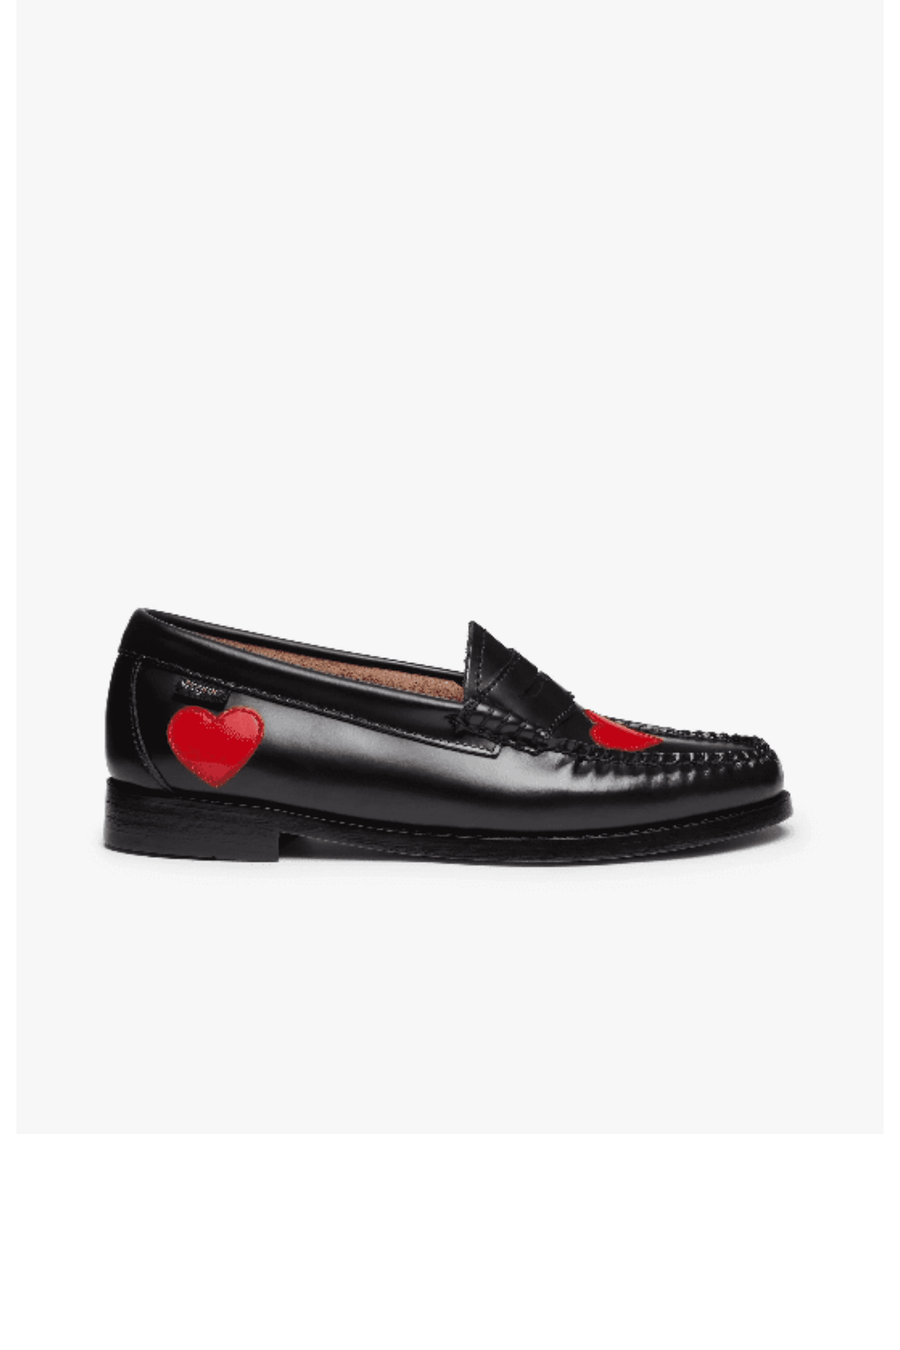 G.H. Bass Weejun Penny Love Loafers